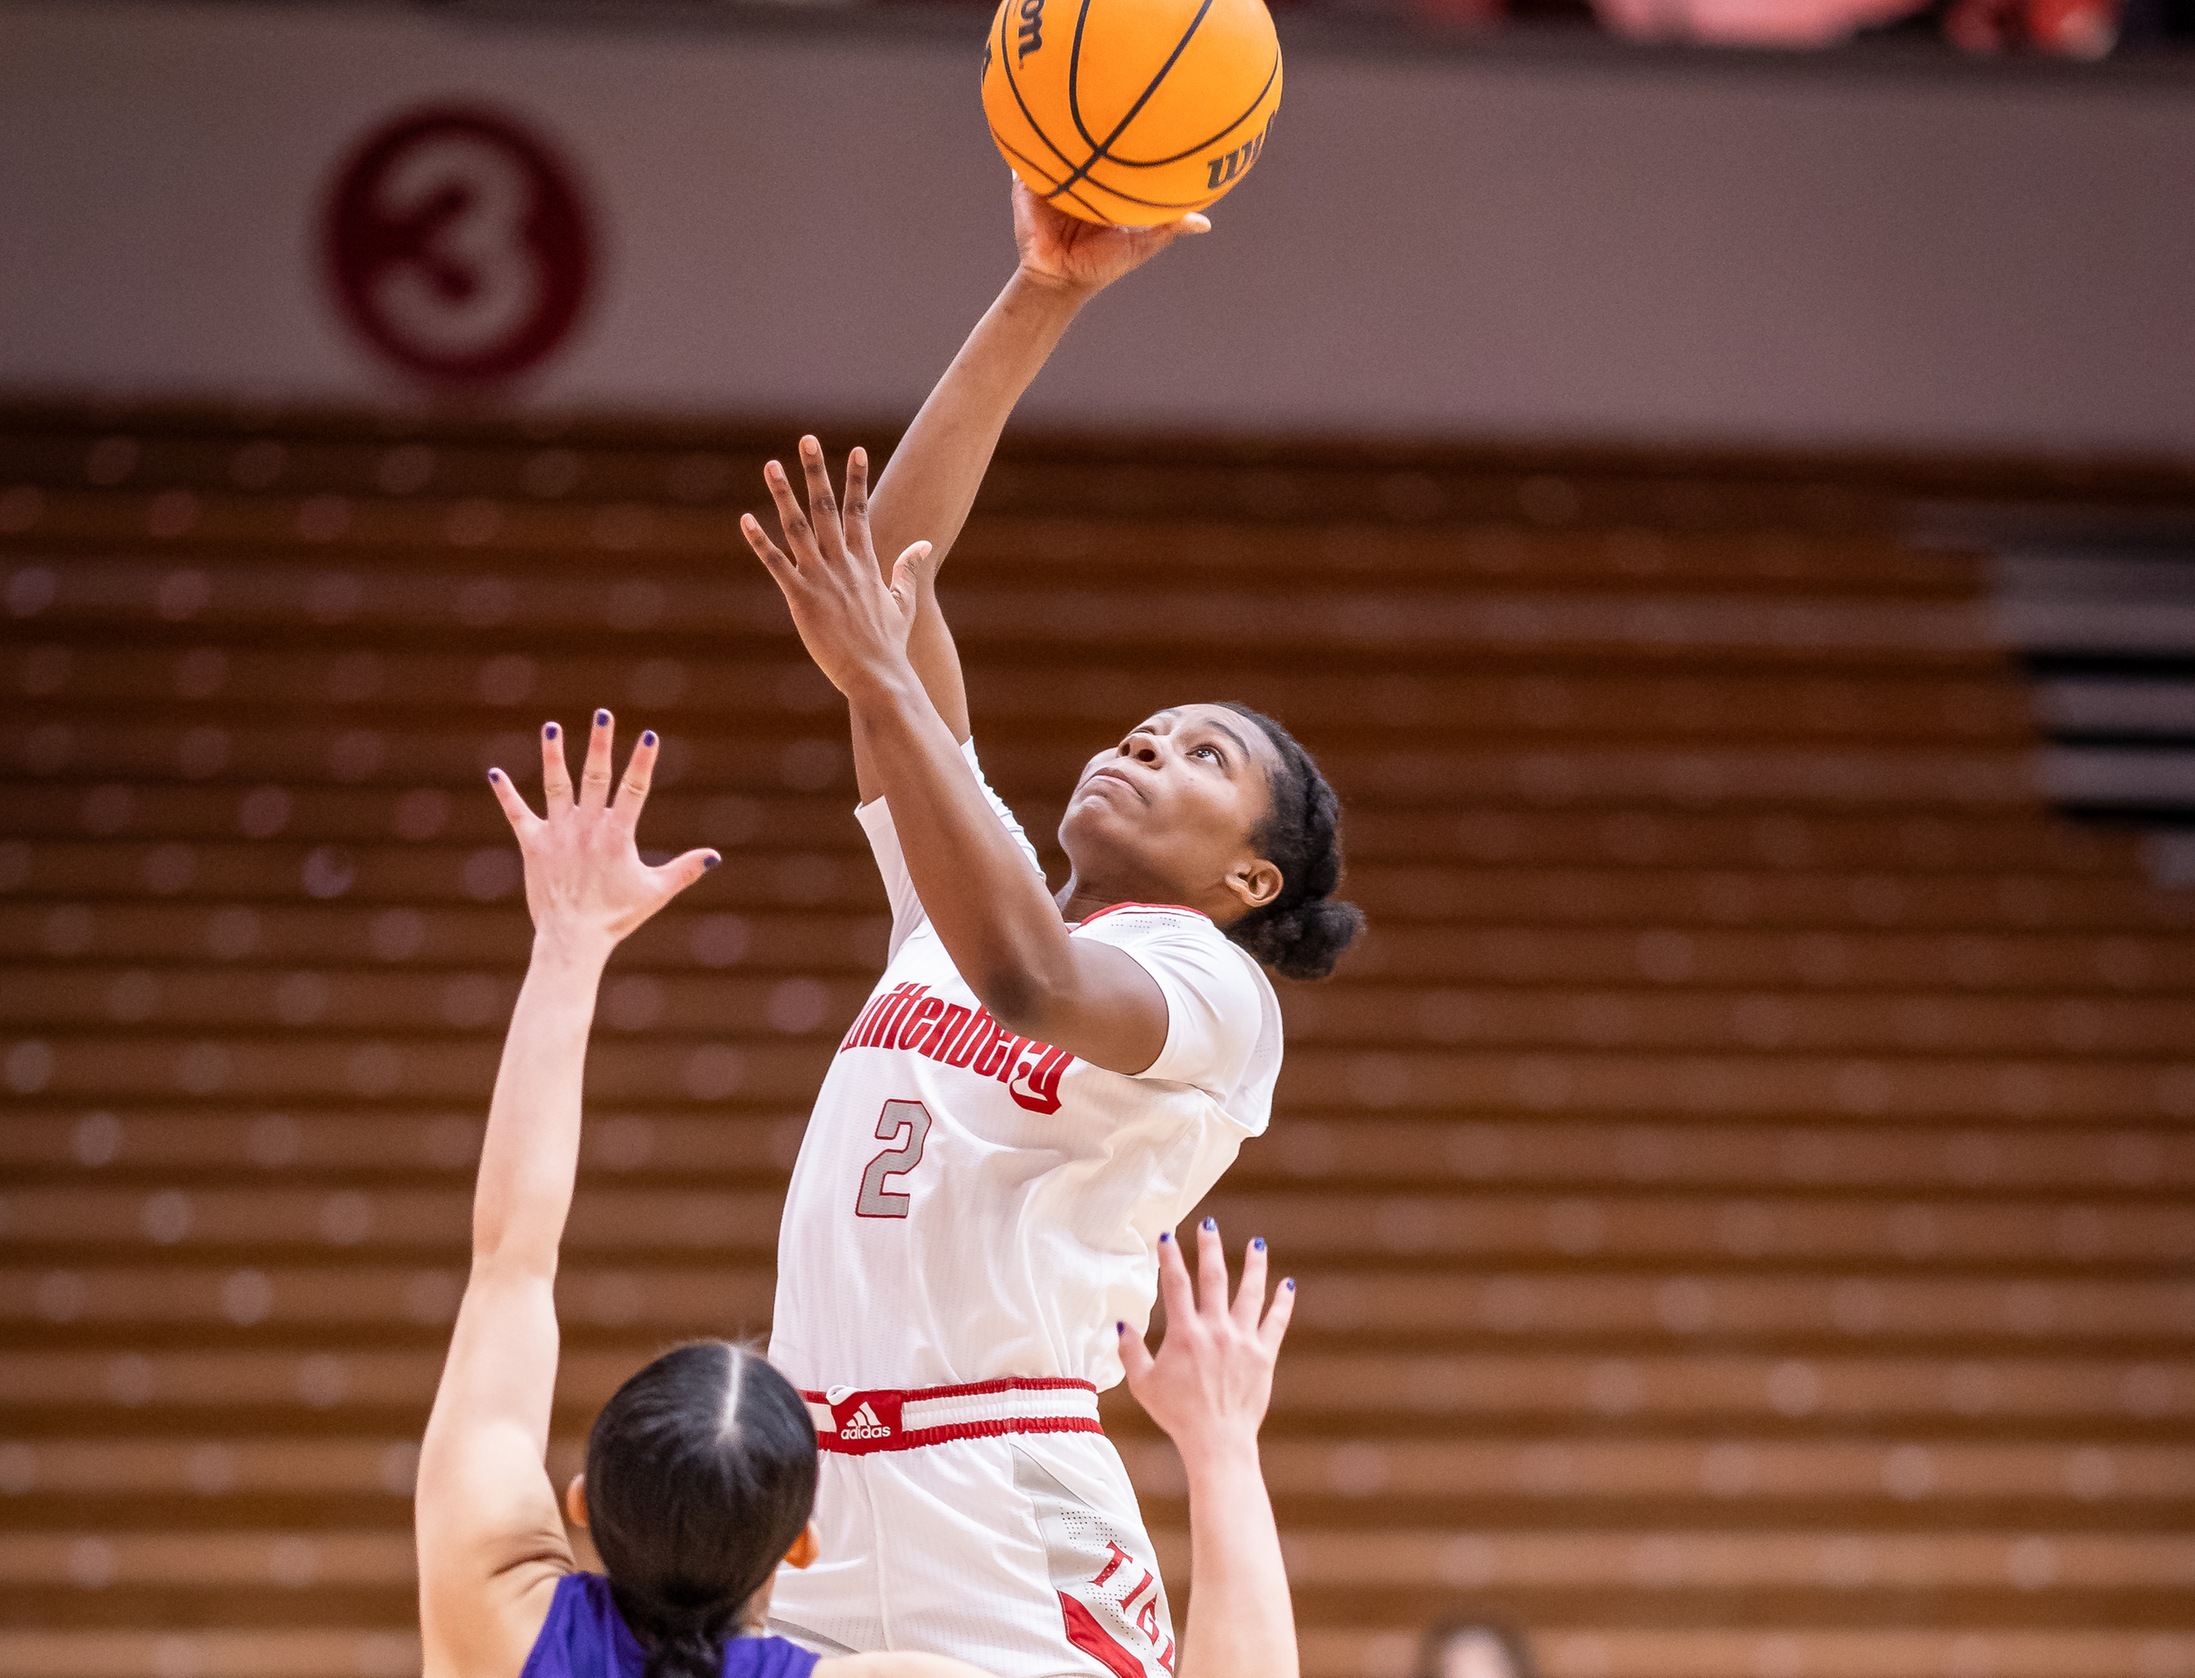 Wittenberg junior Jazmyn Gaines-Burns attempts a shot during the Tigers' 80-39 win over Kenyon in the NCAC Tournament quarterfinals on Tuesday. | Photo by Pam Klopfer